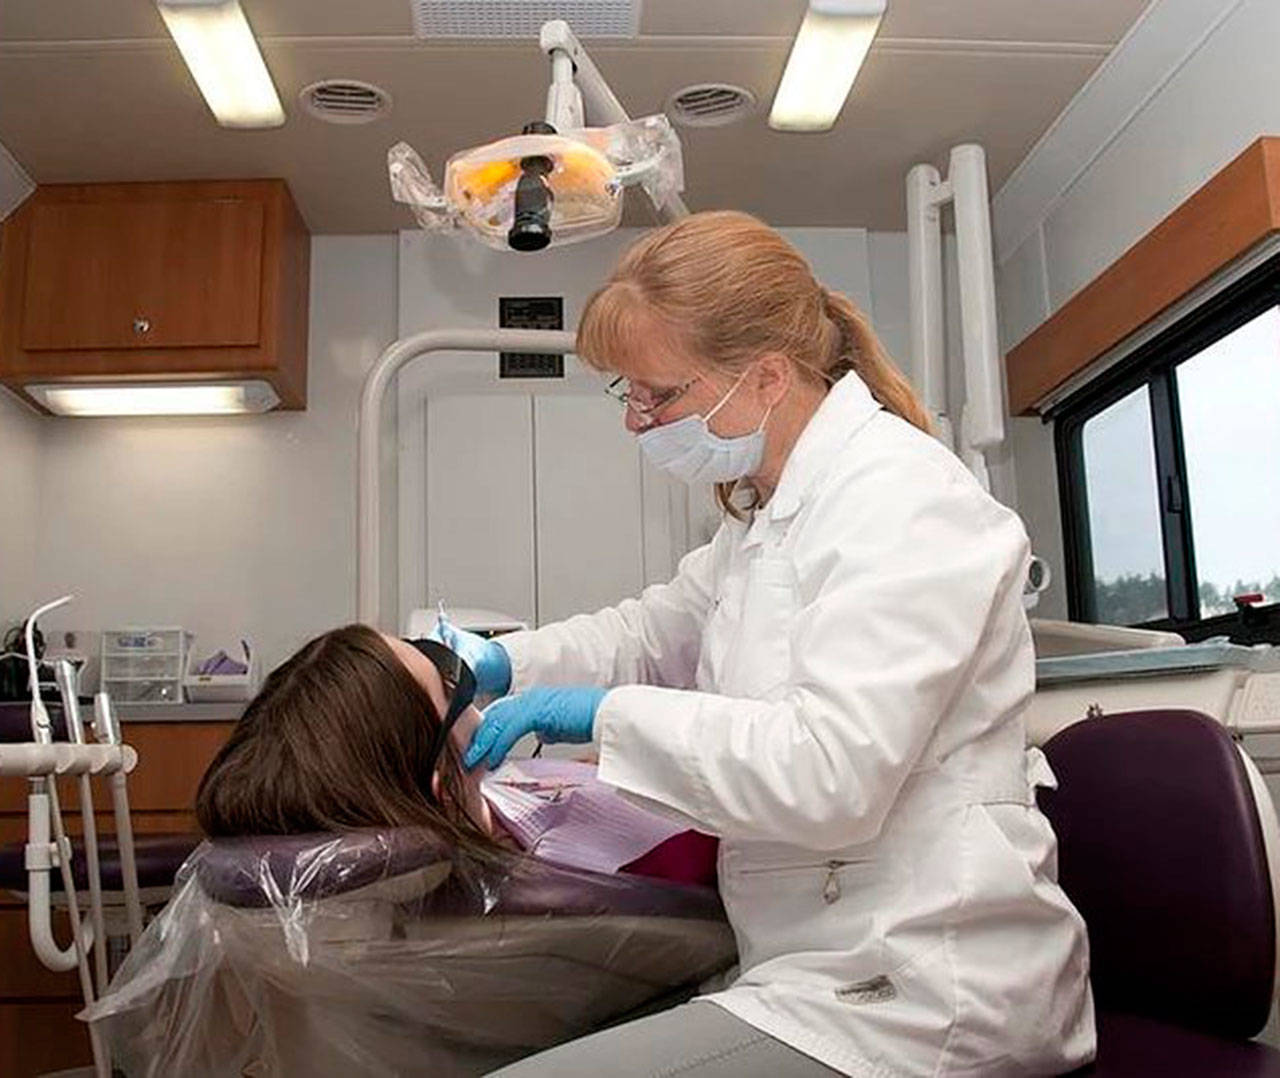 Fish for Teeth brings free mobile dental clinic to Friday Harbor